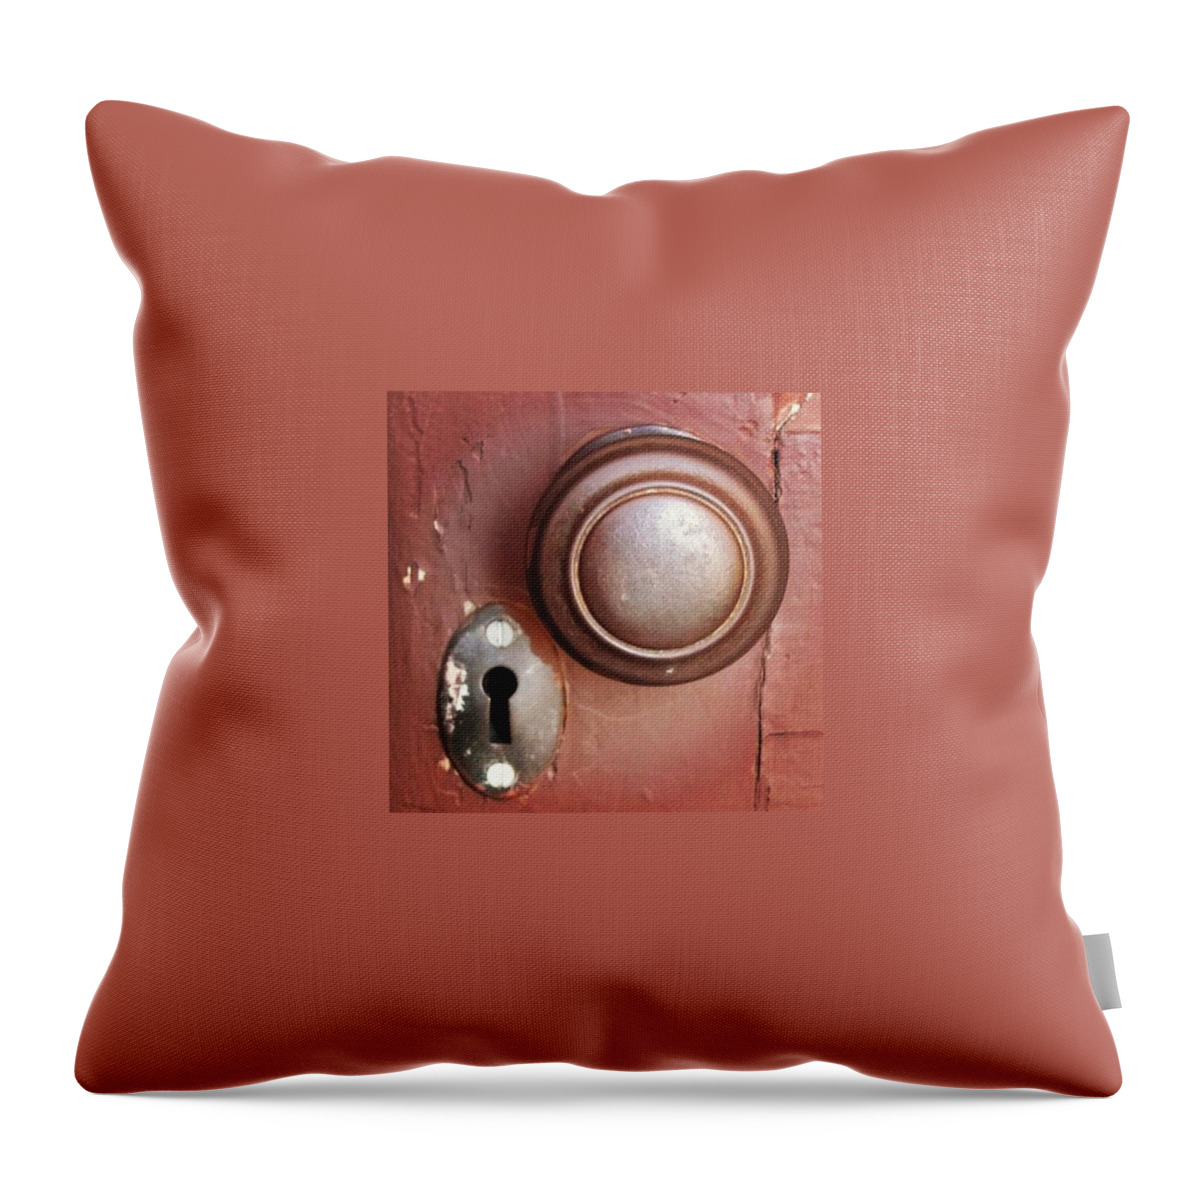 Keyhole Throw Pillow featuring the photograph Take Chances Open The Door by Rosie Lackey